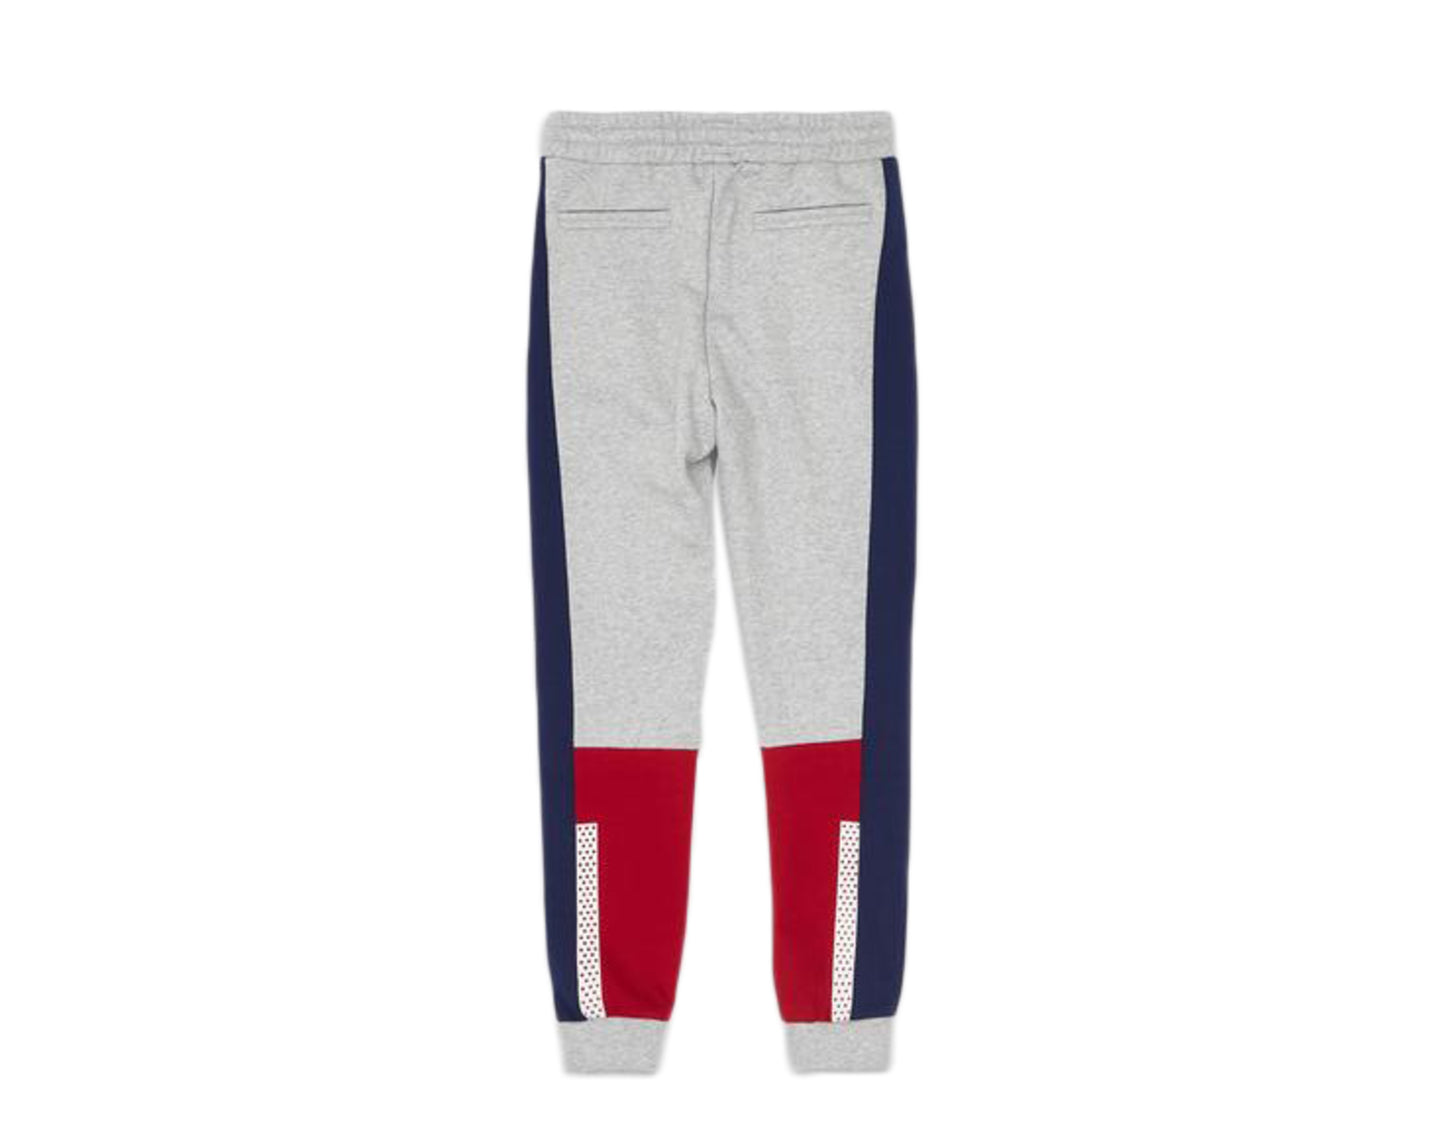 Le Tigre Lincoln Jogger Grey/Navy/Red Men's Sweatpants LT521-GRY